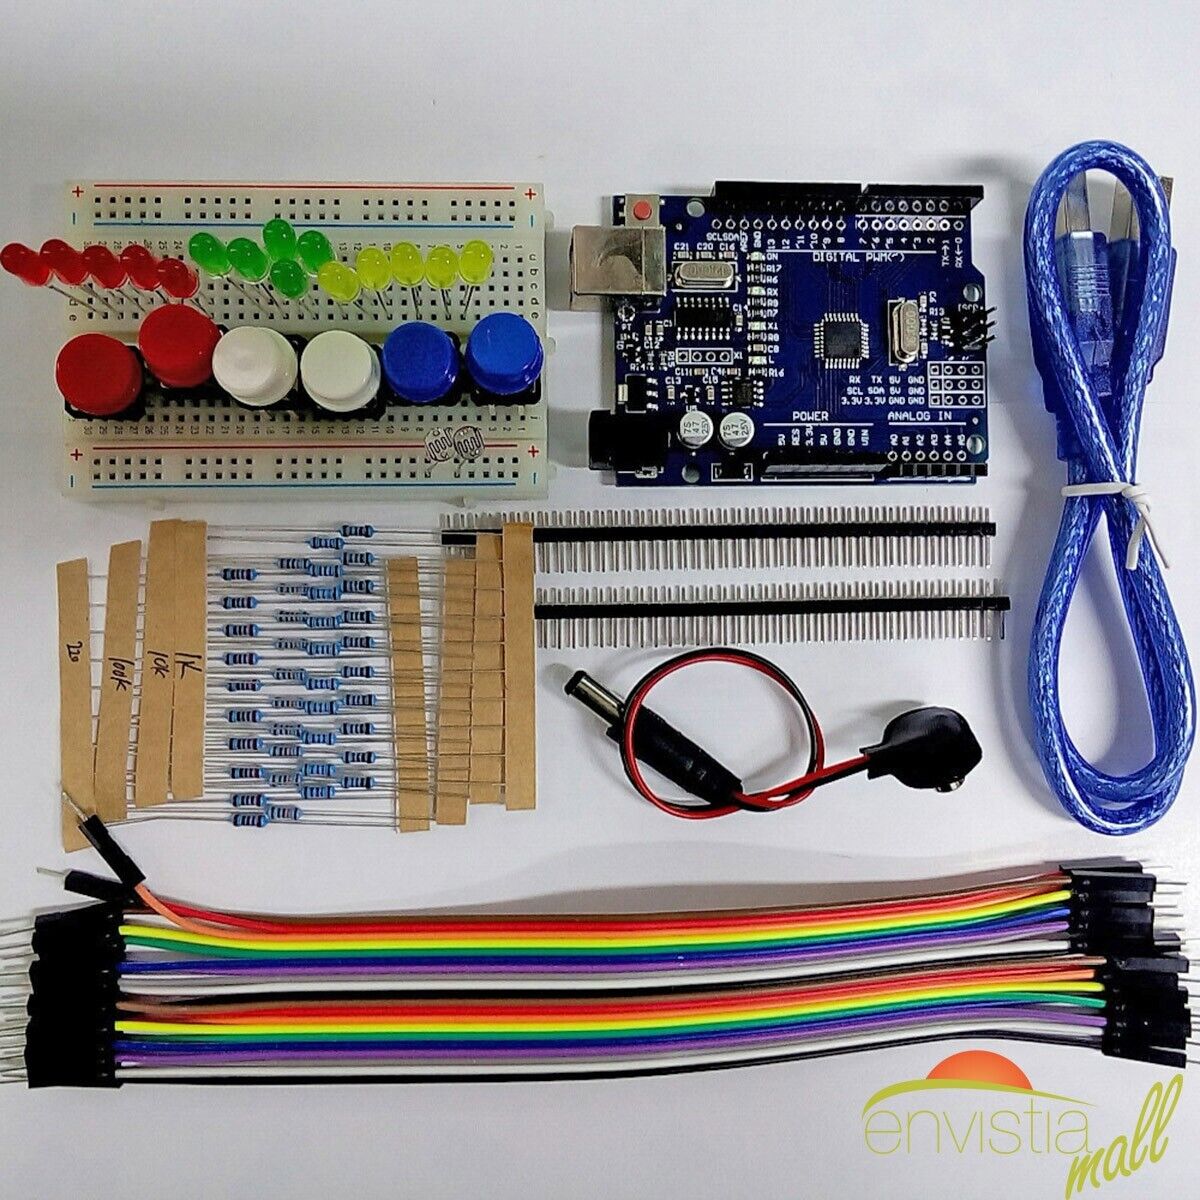 ATmega328P Starter Kit w/ LEDs Switches Resistors Cables Jumpers & Breadboard